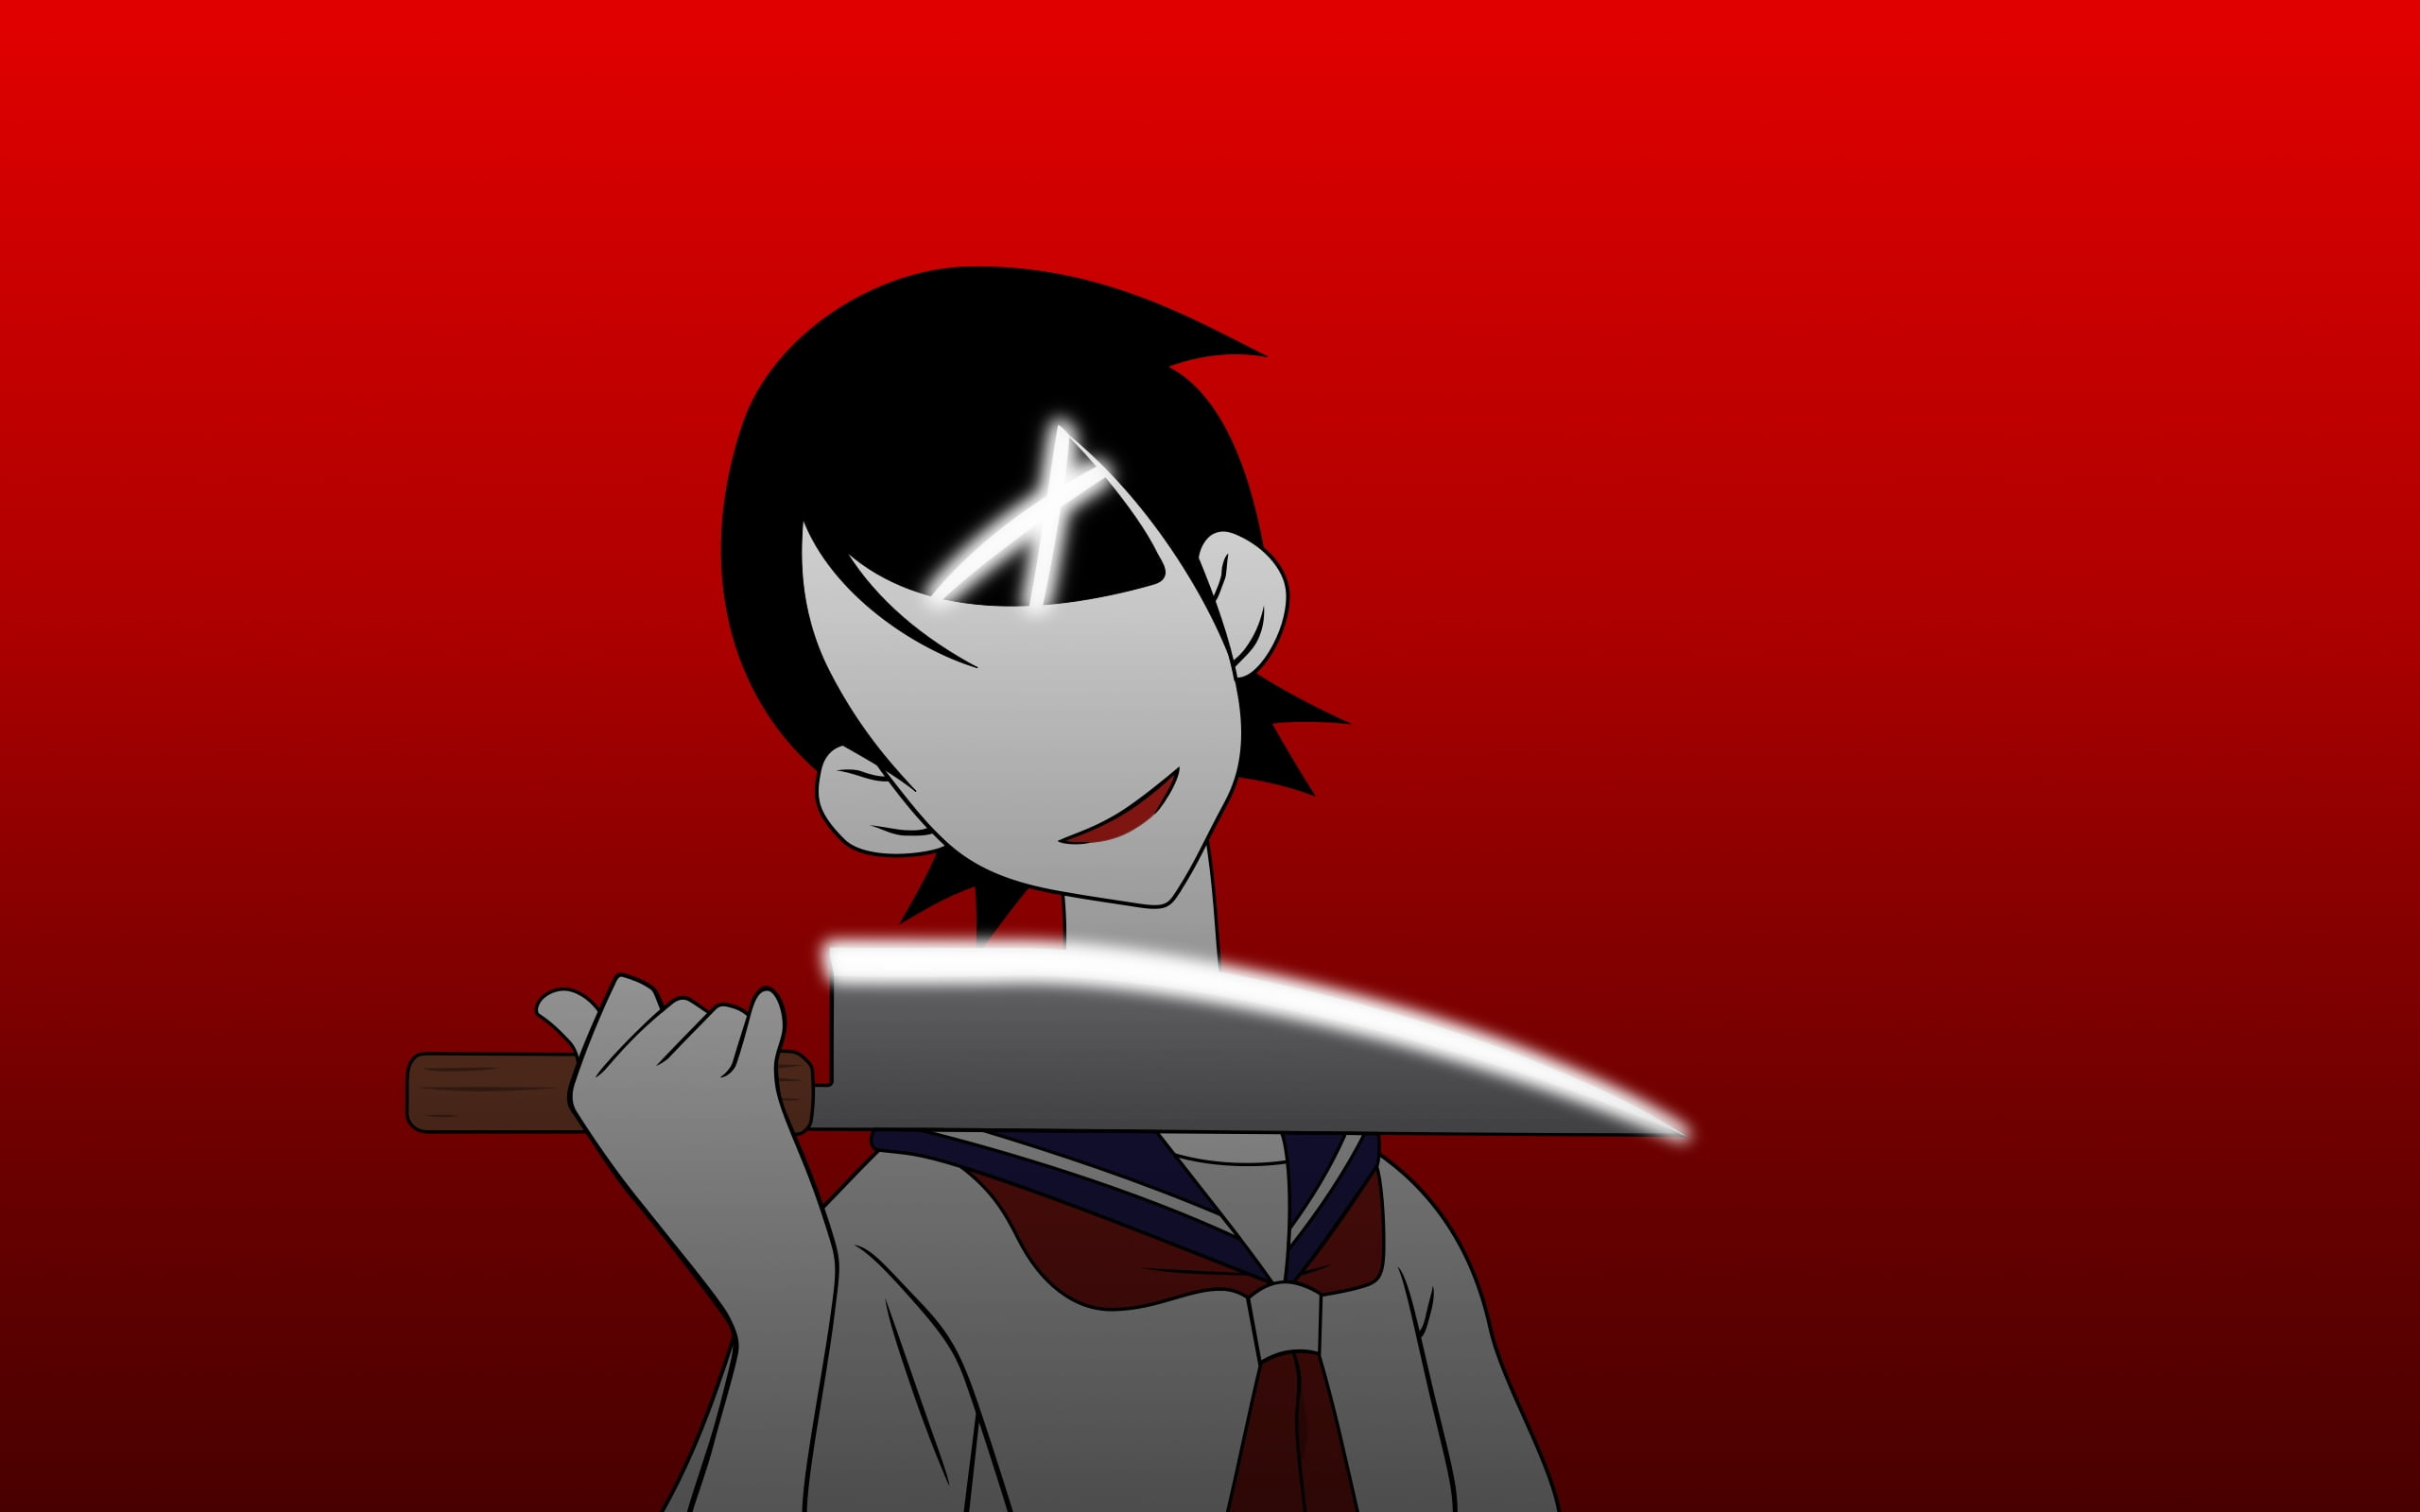 black female character holding knife illustration with red background